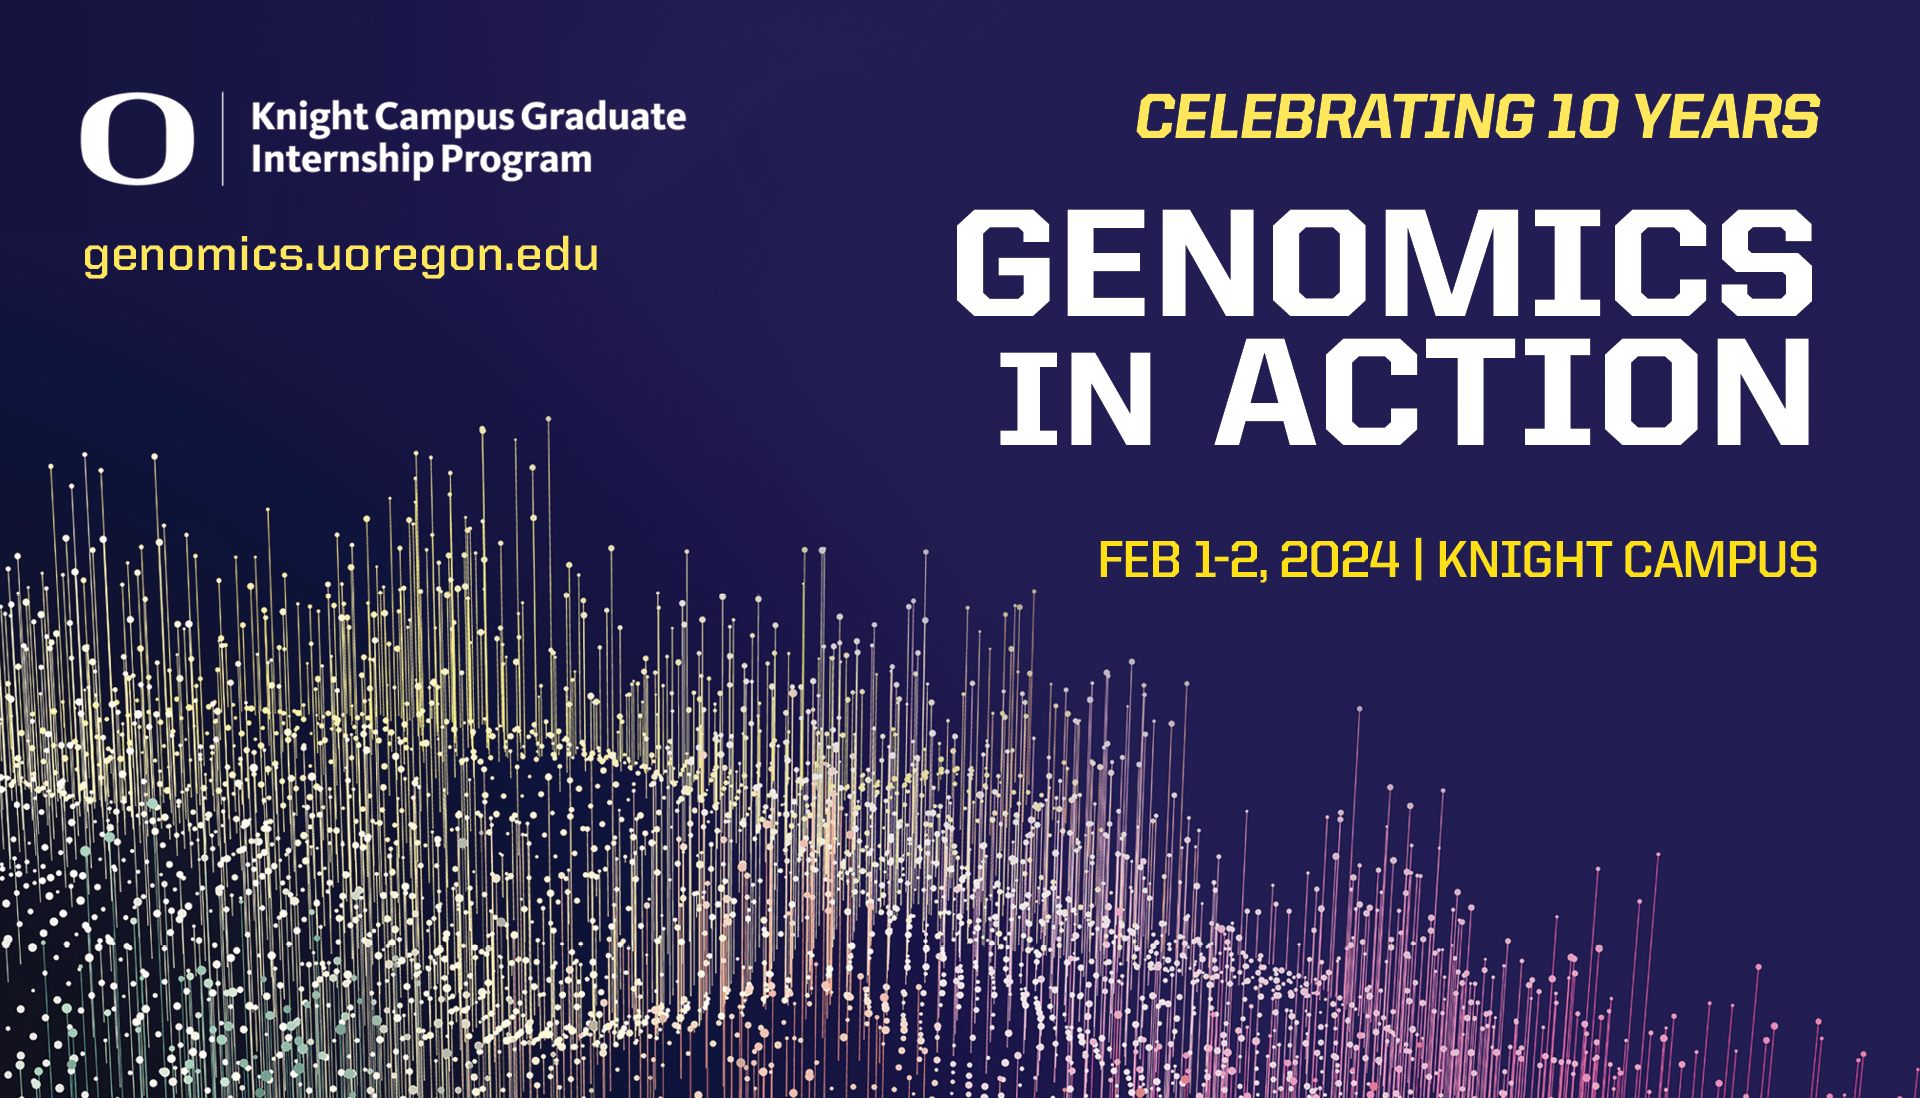 Celebrating 10 years Genomics in Action Feb 1-2, 2024 | Knight Campus